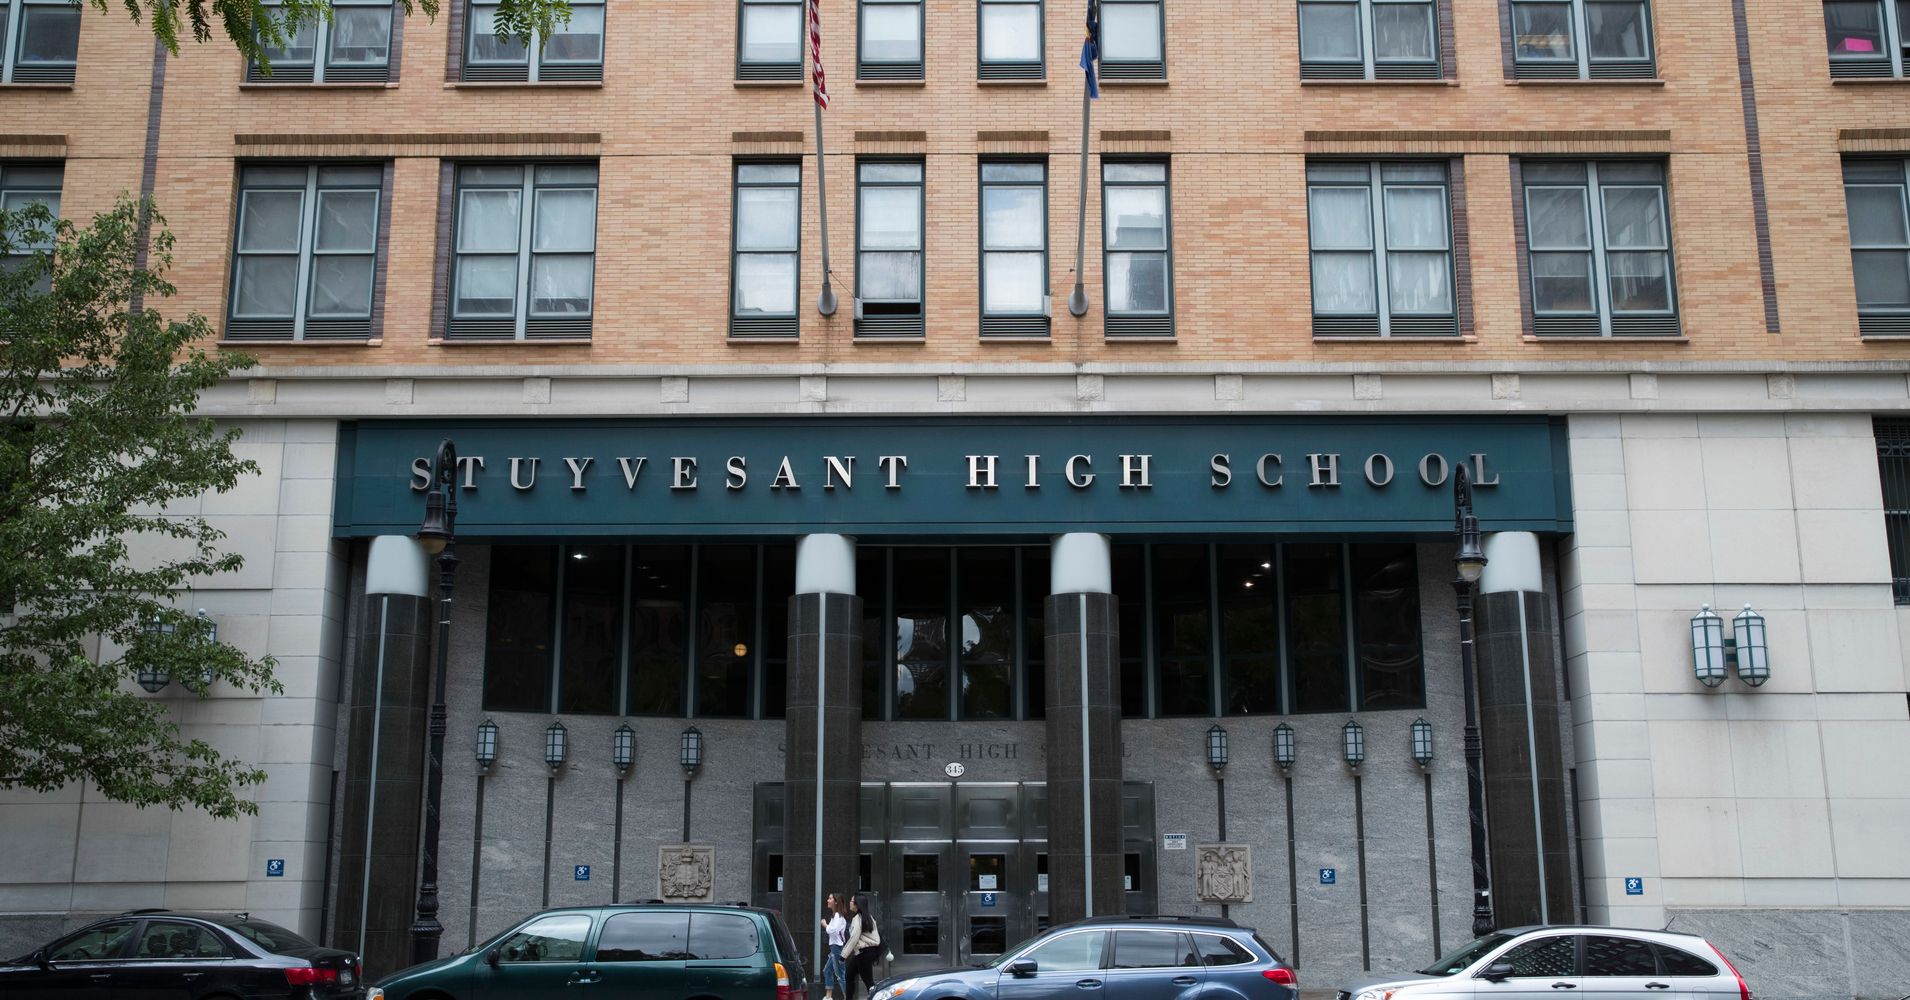 8-elite-public-schools-in-nyc-only-accepted-190-black-students-the-boards